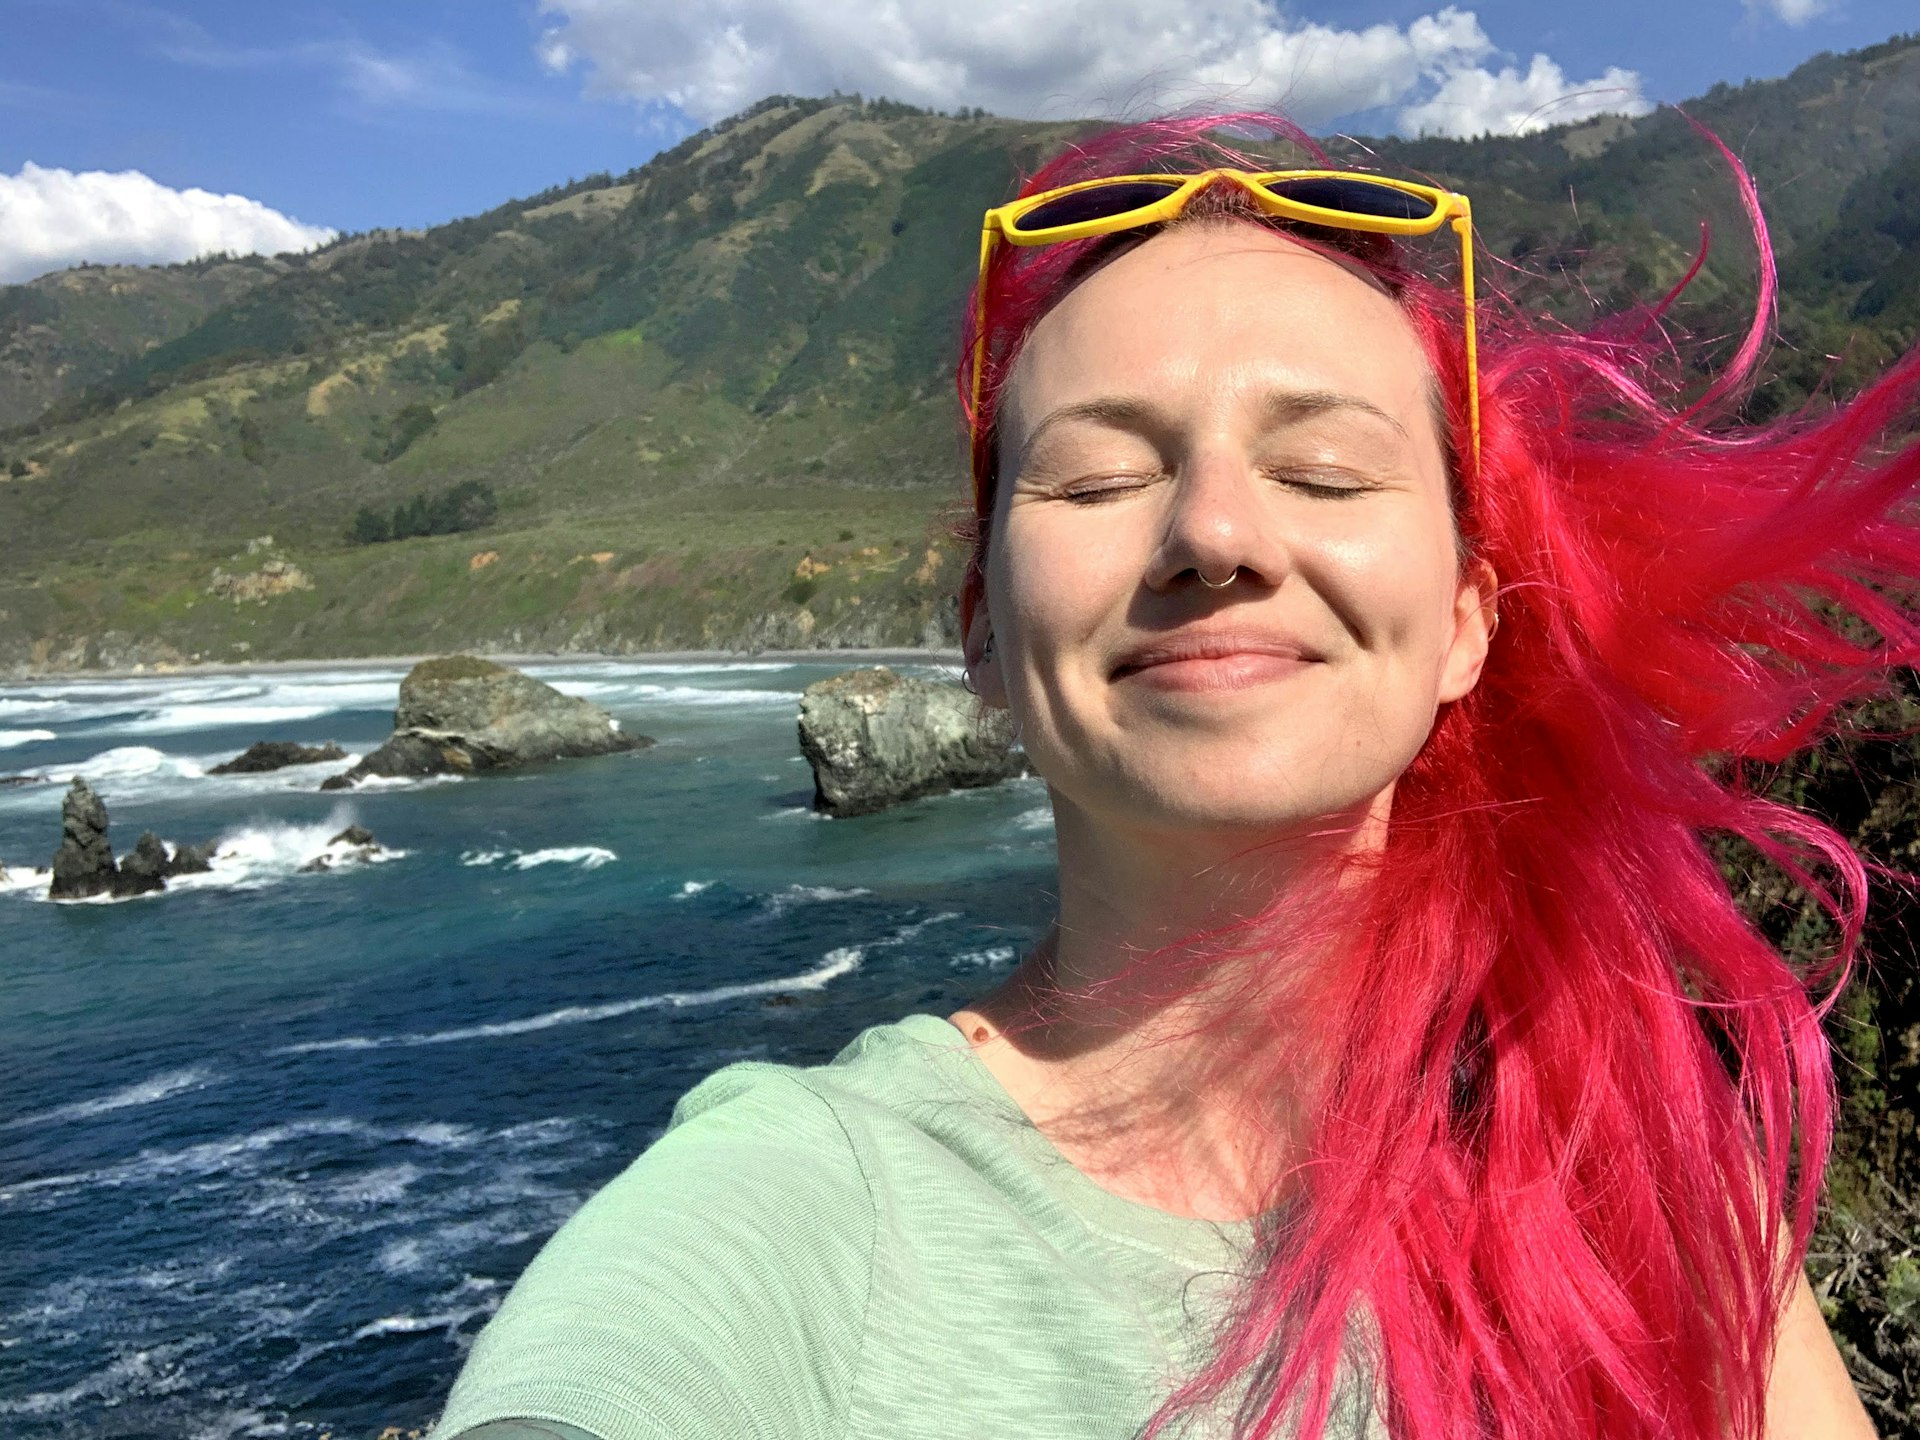 A woman with red hair smiling with her eyes closed with the Big Sur coastline behind her